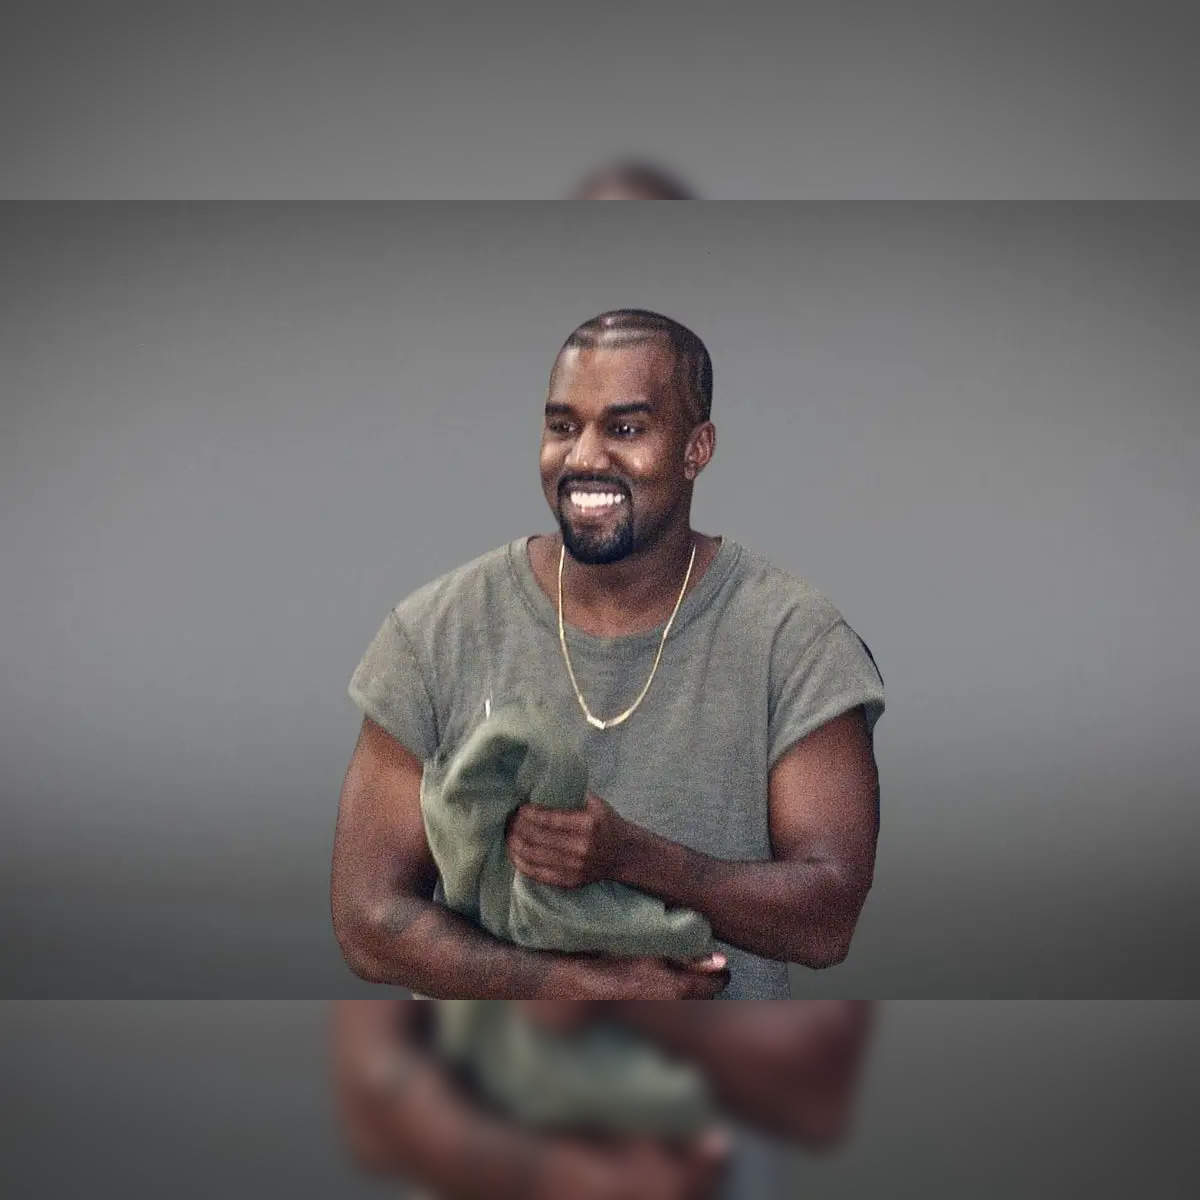 https://img.etimg.com/thumb/width-1200,height-1200,imgsize-37530,resizemode-75,msid-107701245/news/international/us/heres-what-kanye-west-said-about-his-bankruptcy-situation-amidst-vultures-release.jpg